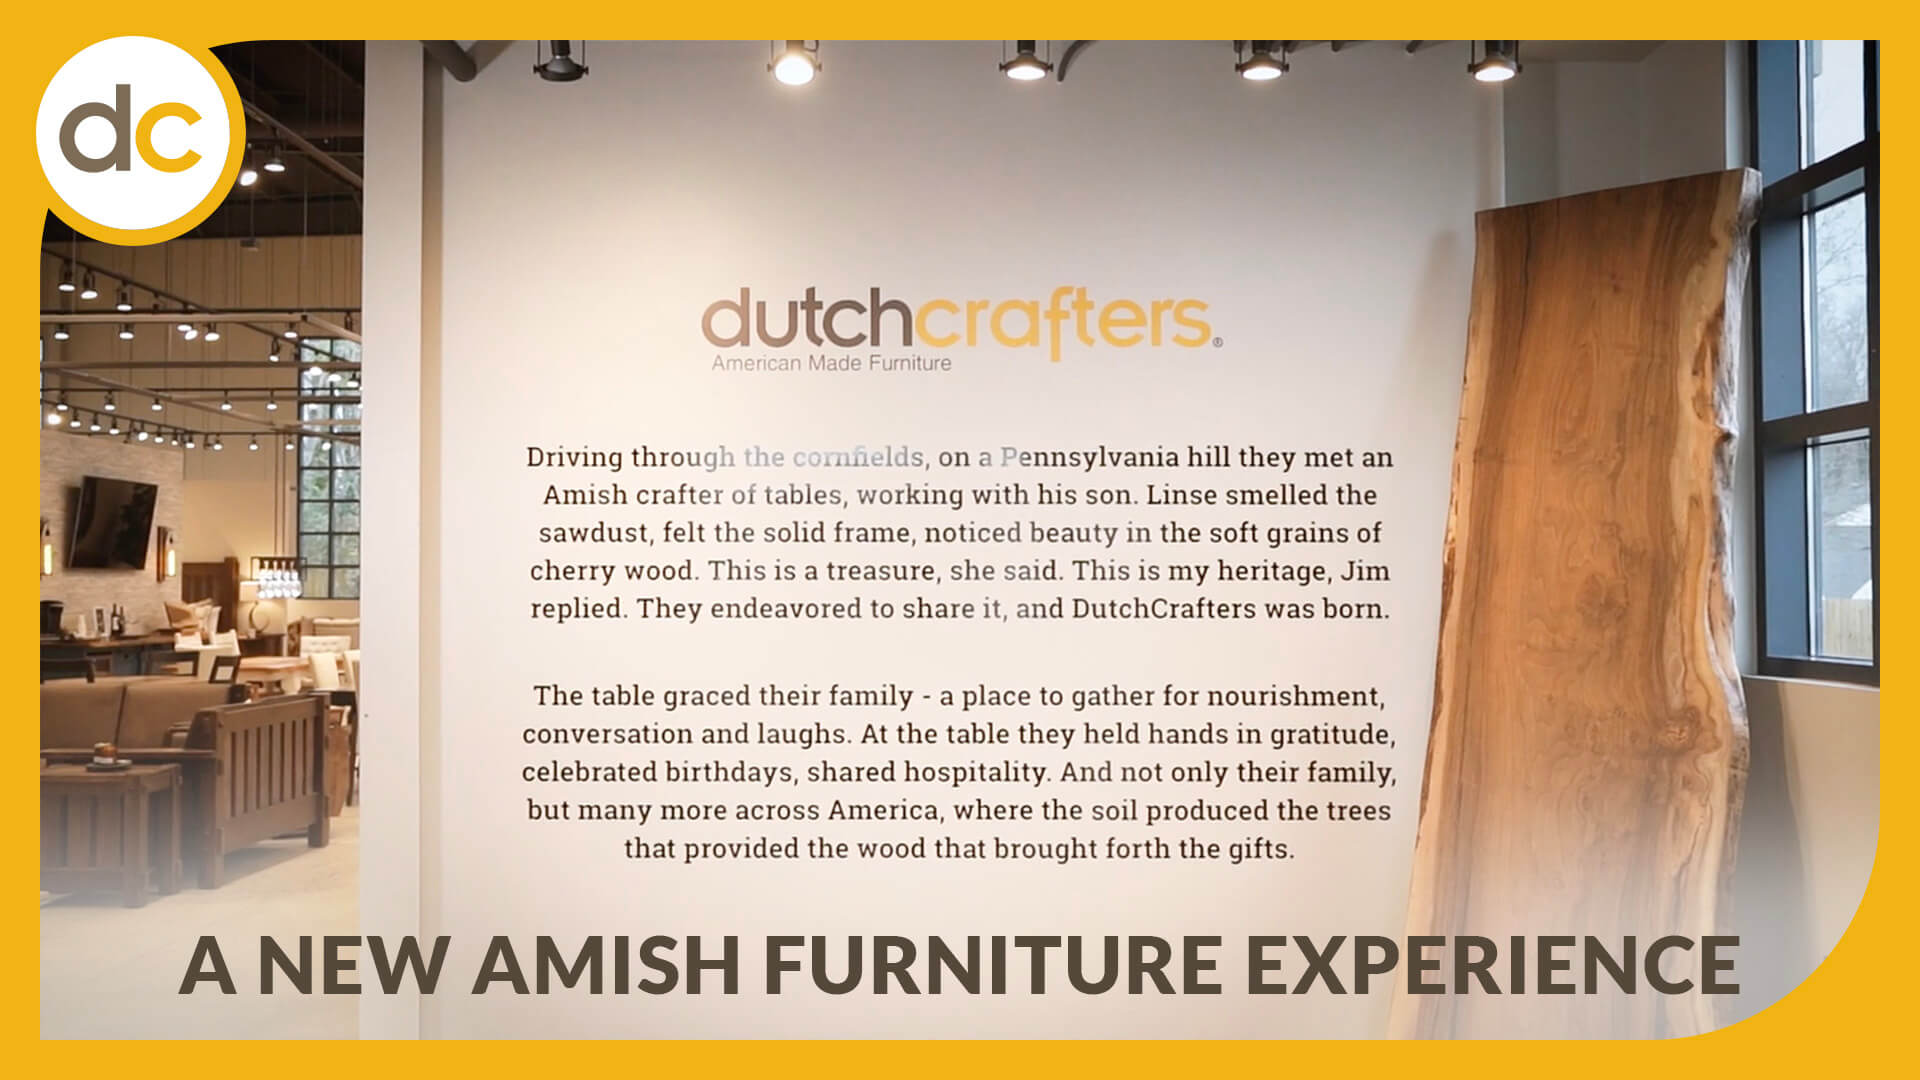 The welcome wall of the DutchCrafters Amish furniture showroom in Alpharetta, Georgia, paired with the title A New Amish Furniture Experience